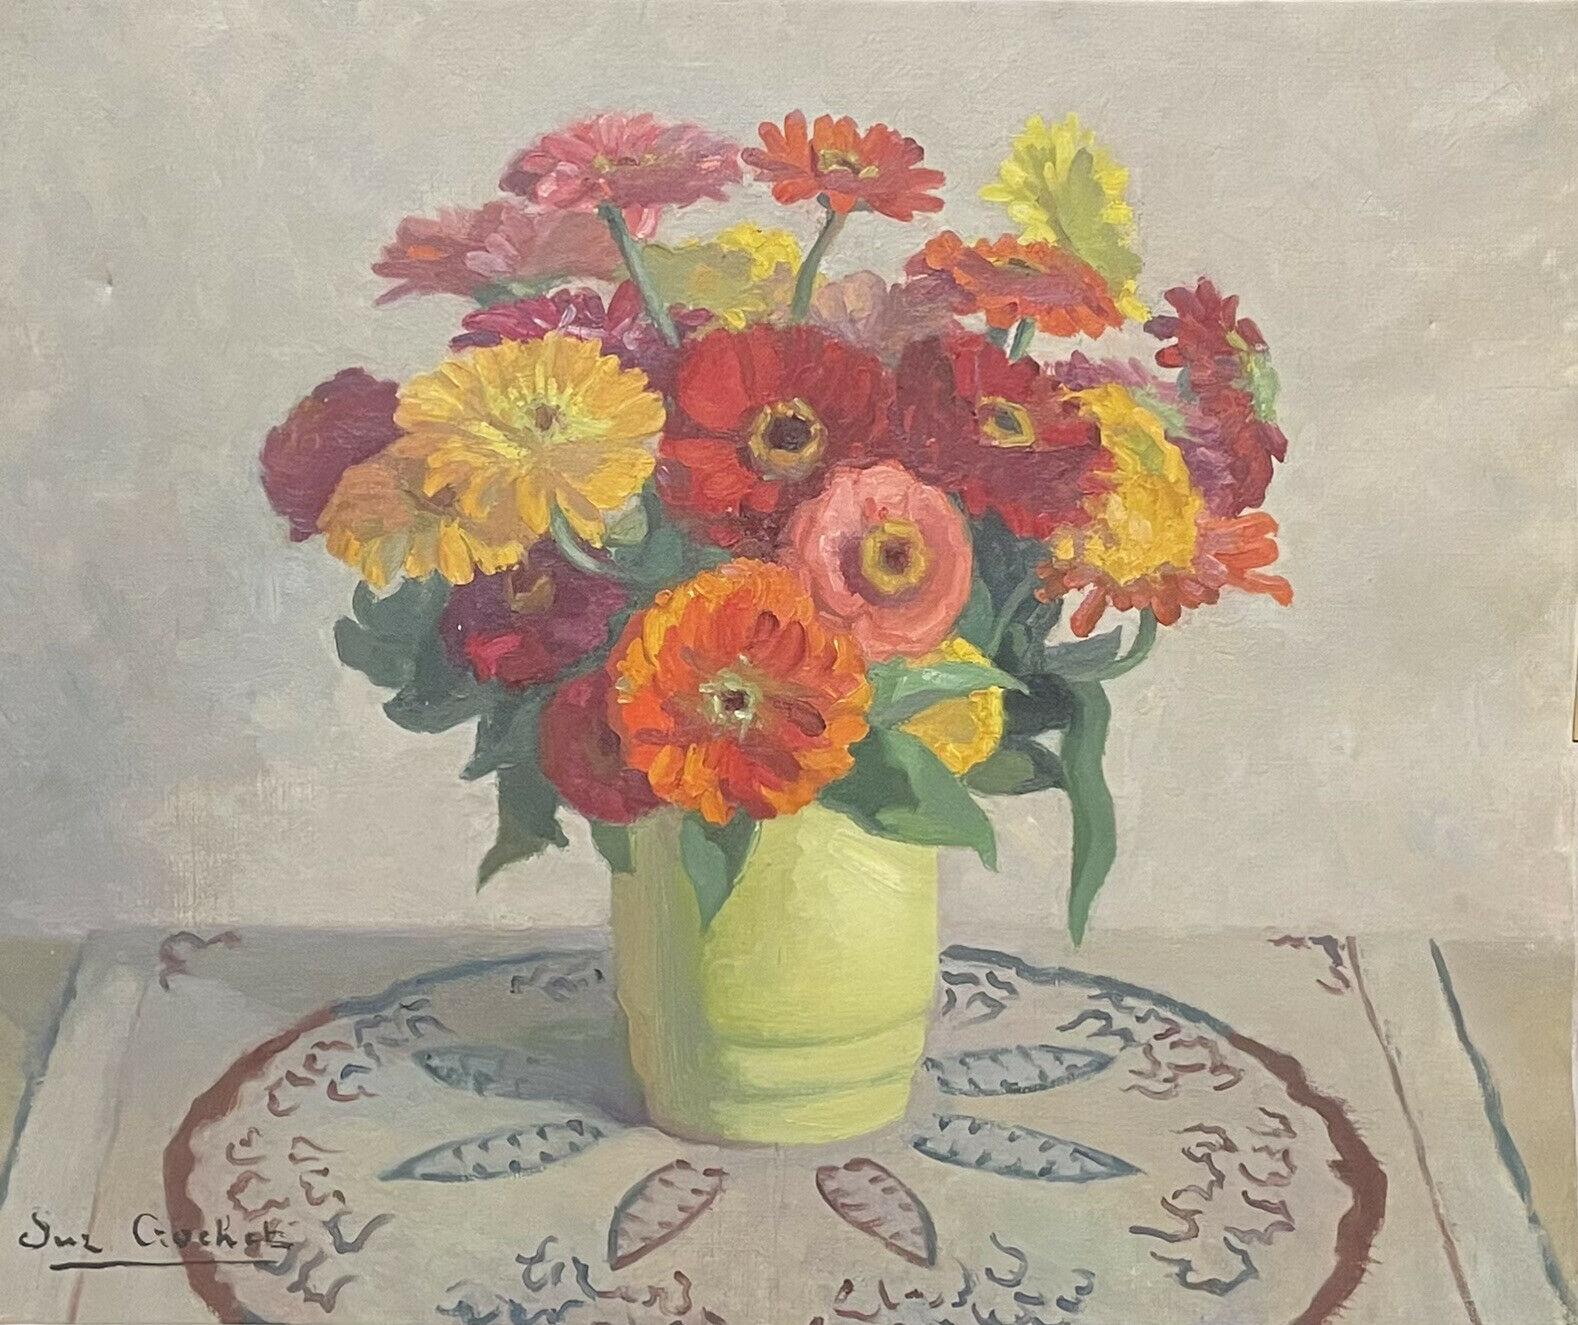 1930's FRENCH SIGNED VINTAGE OIL PAINTING - FLOWERS IN YELLOW VASE INTERIOR - Painting by Unknown